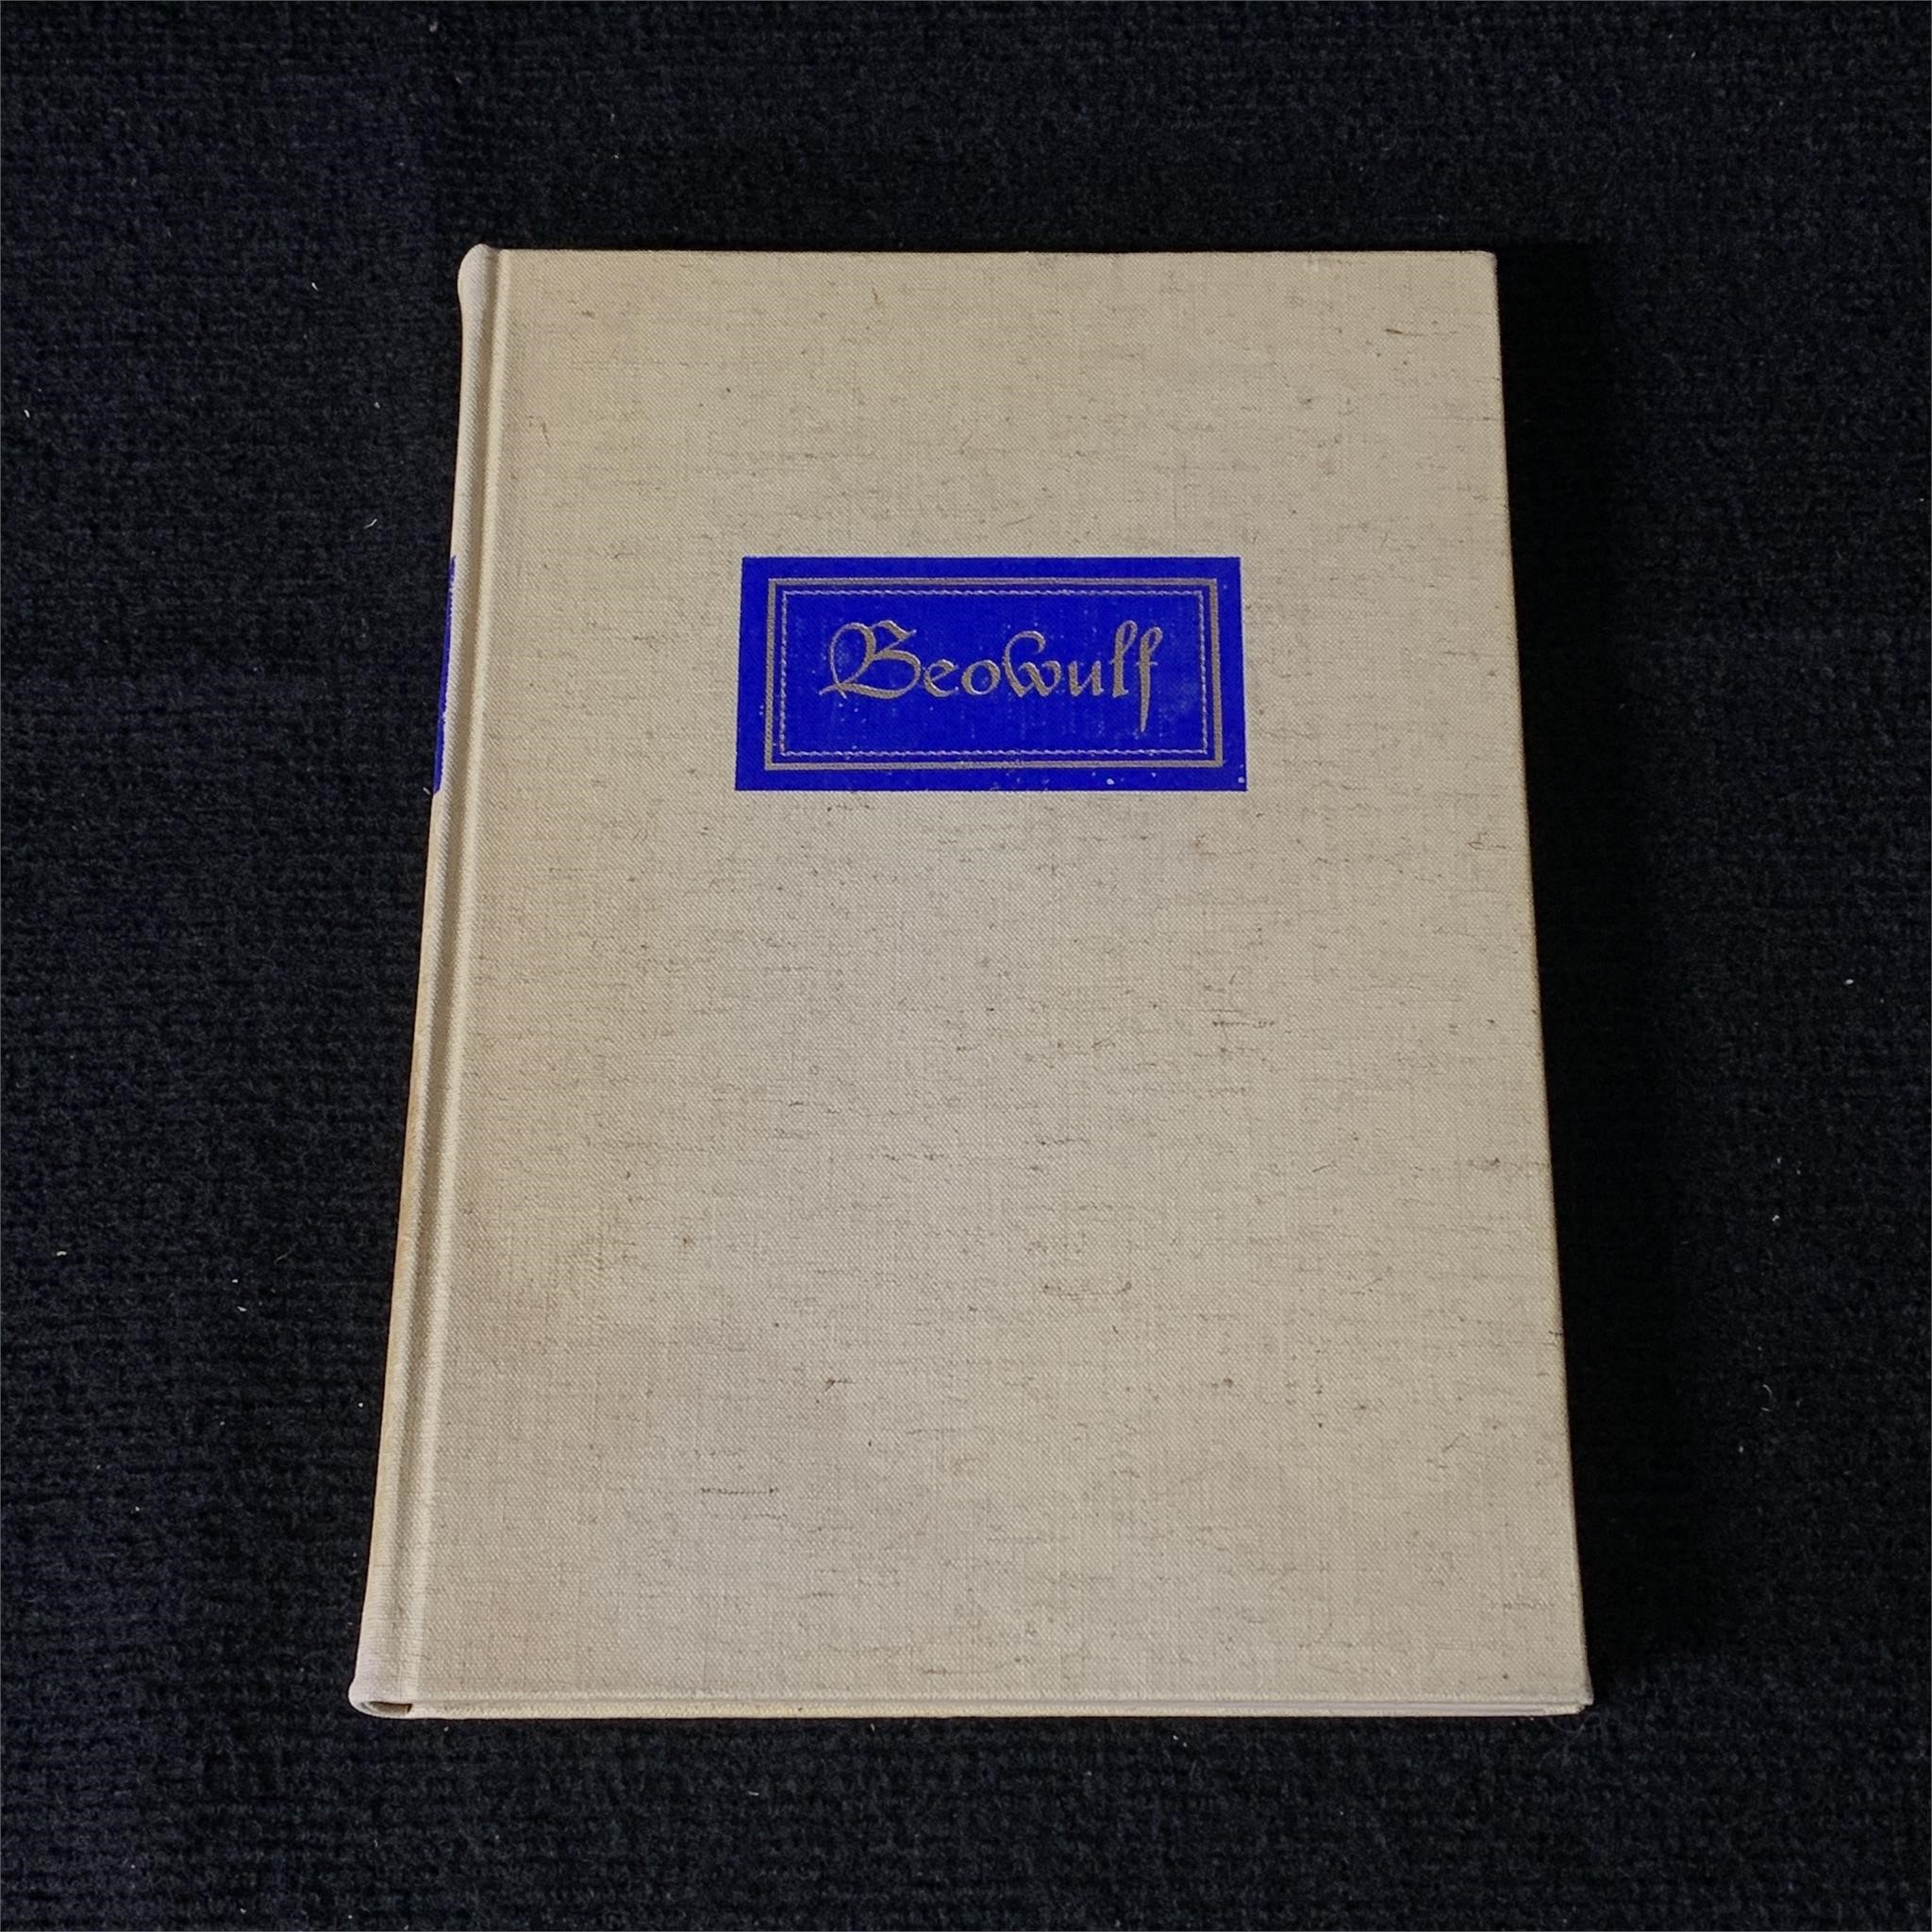 Beowulf 1939 Copy Special Contents